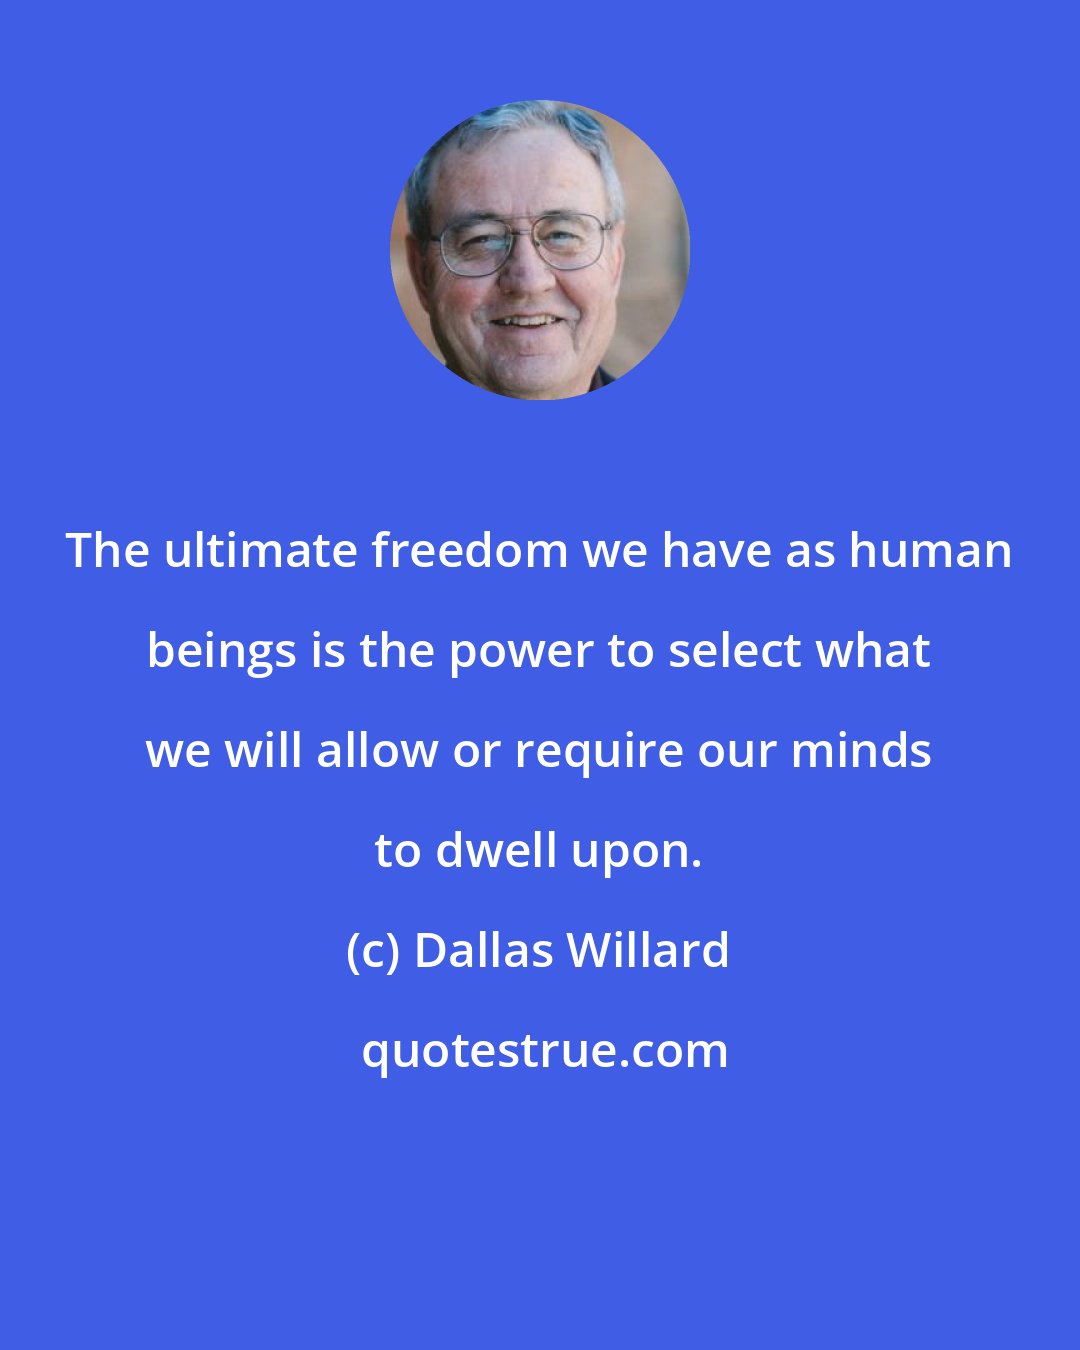 Dallas Willard: The ultimate freedom we have as human beings is the power to select what we will allow or require our minds to dwell upon.